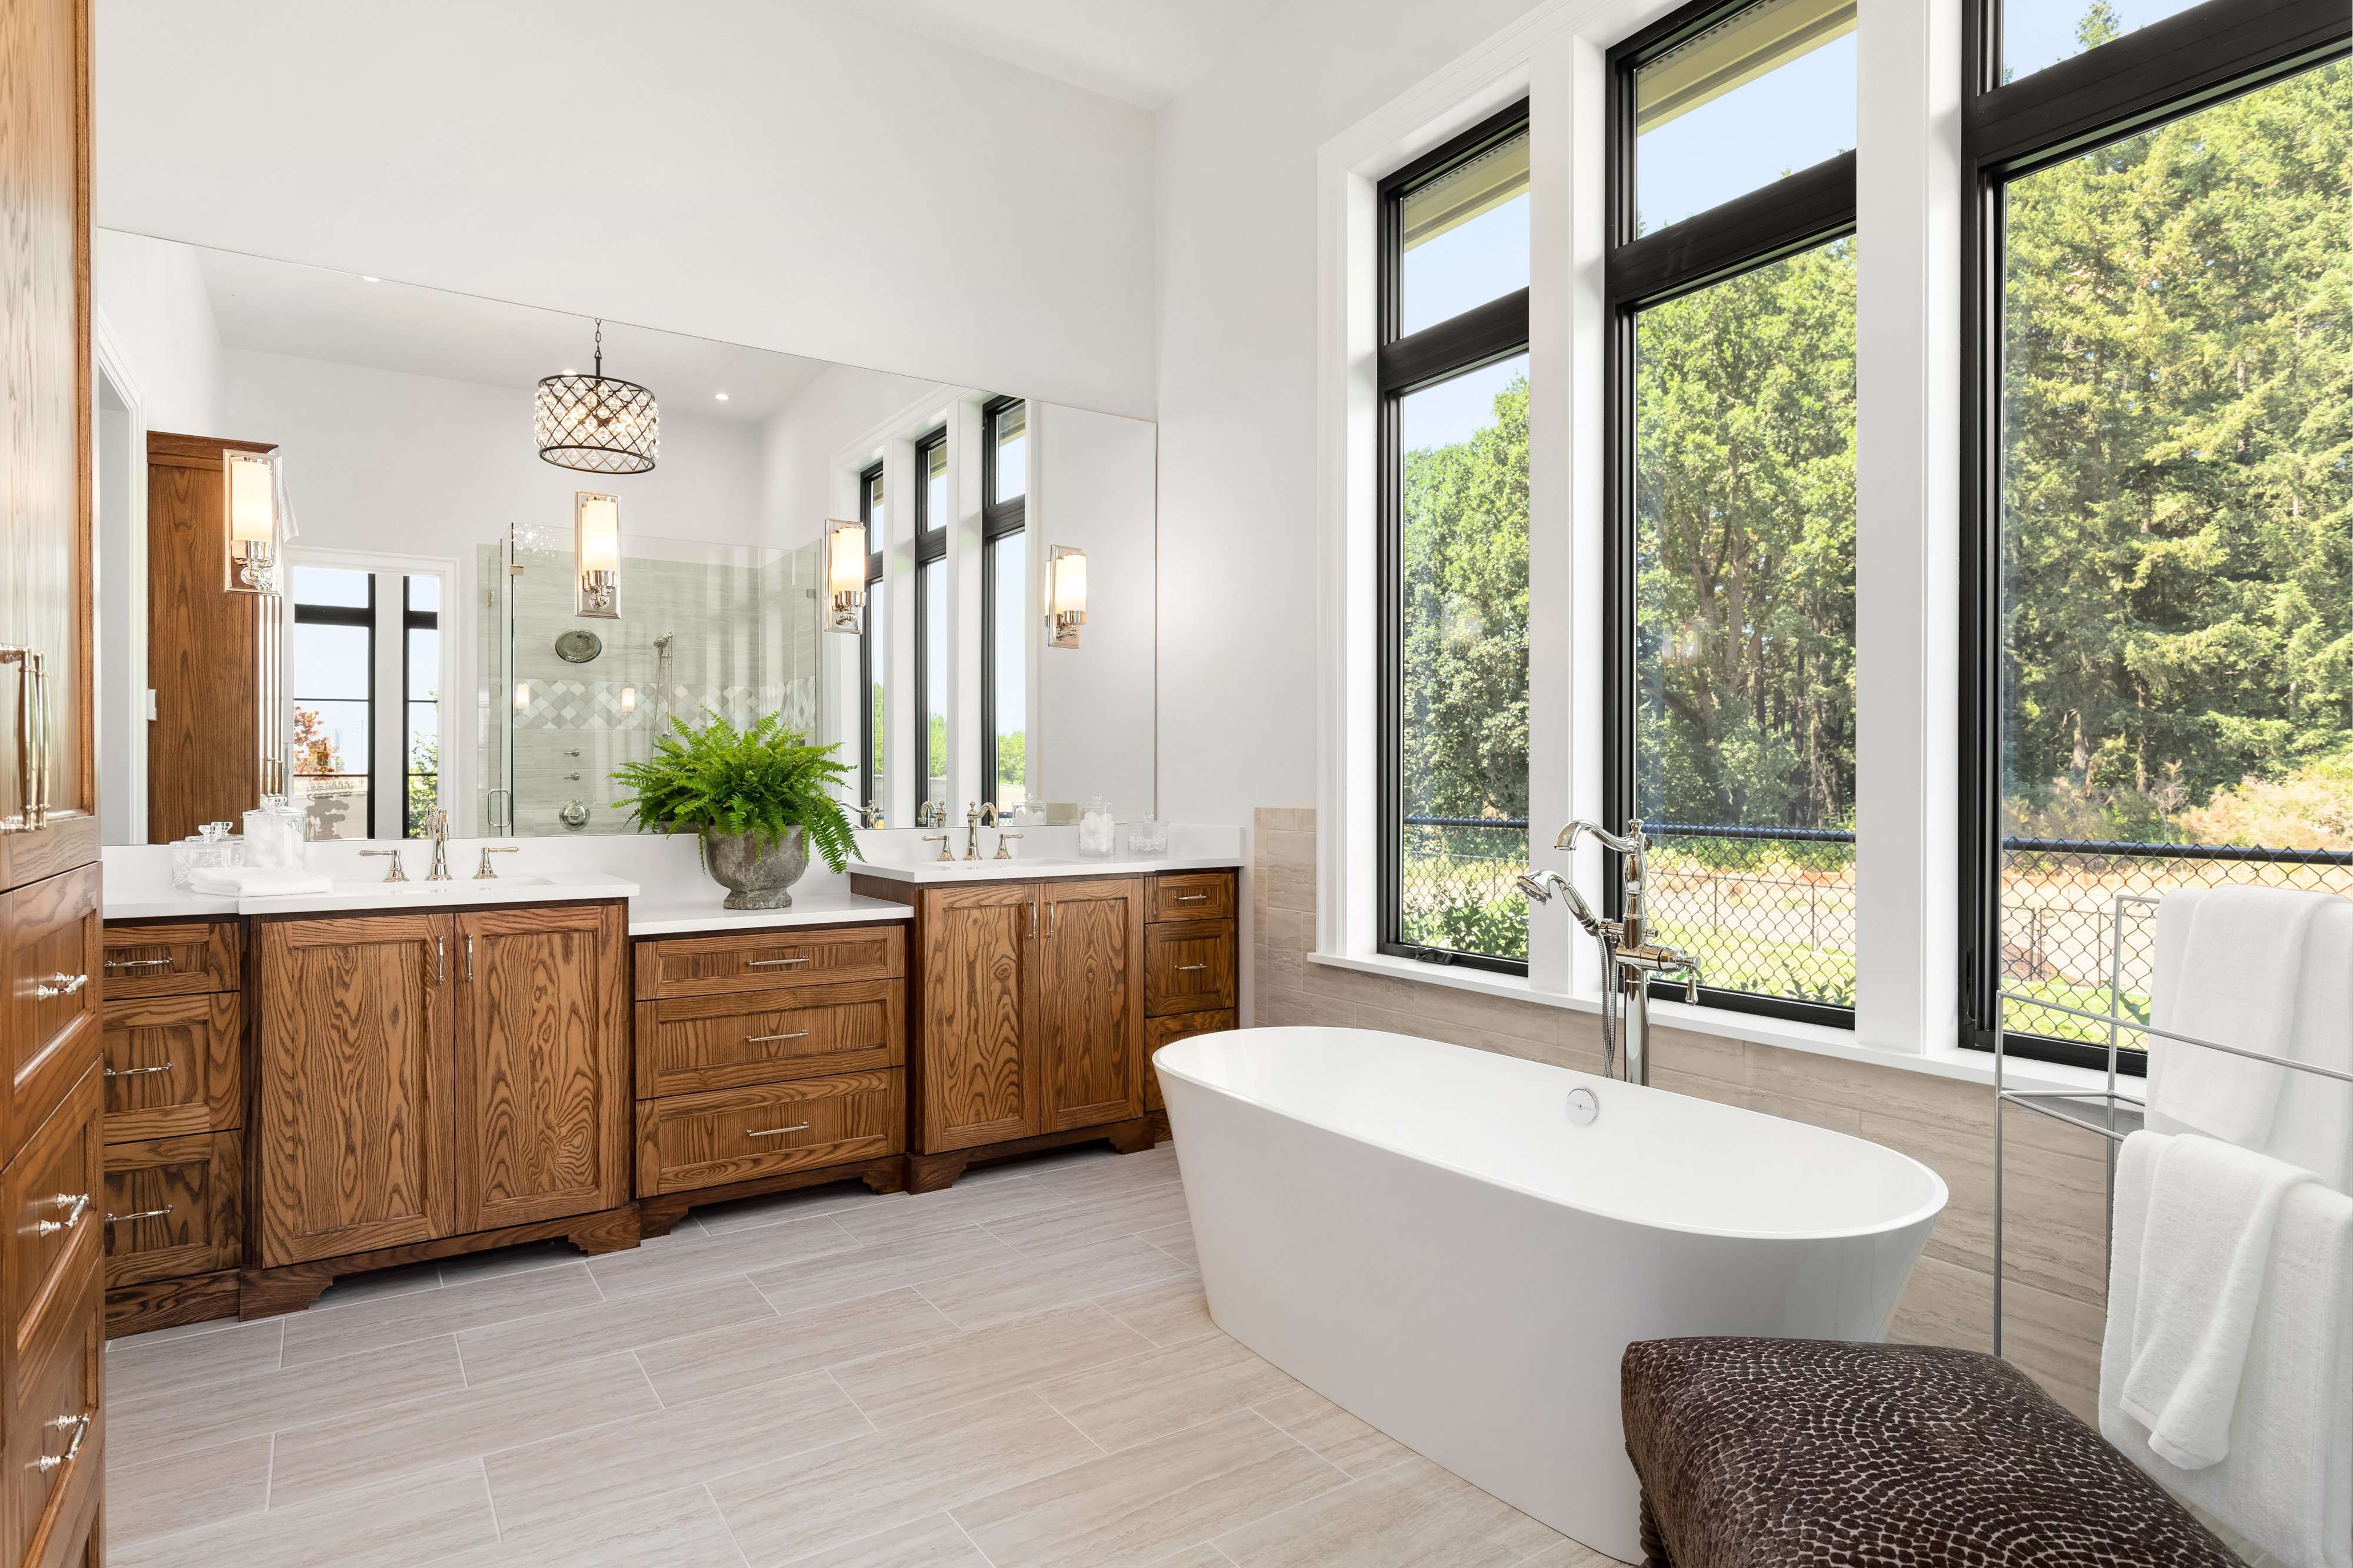 Transitional Bathroom Design with Great Views